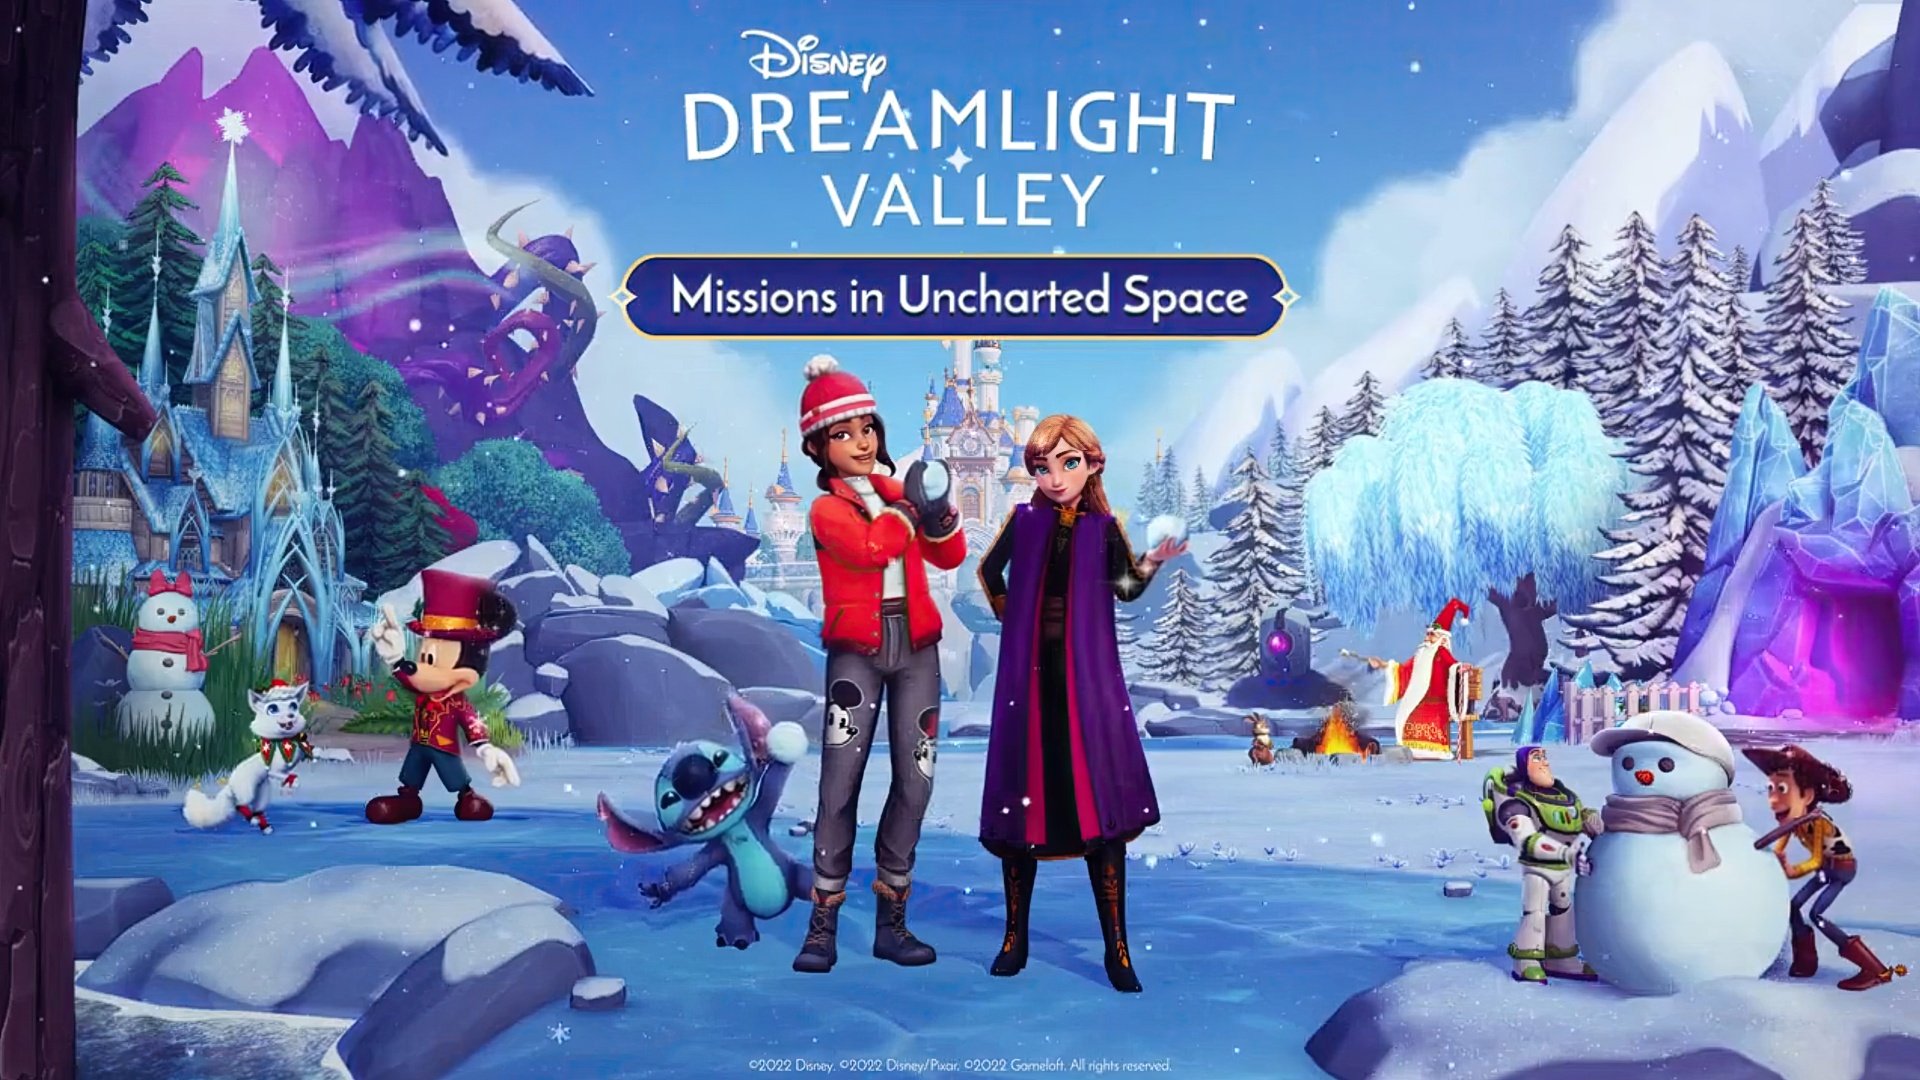 When is the next Dreamlight Valley update release date?